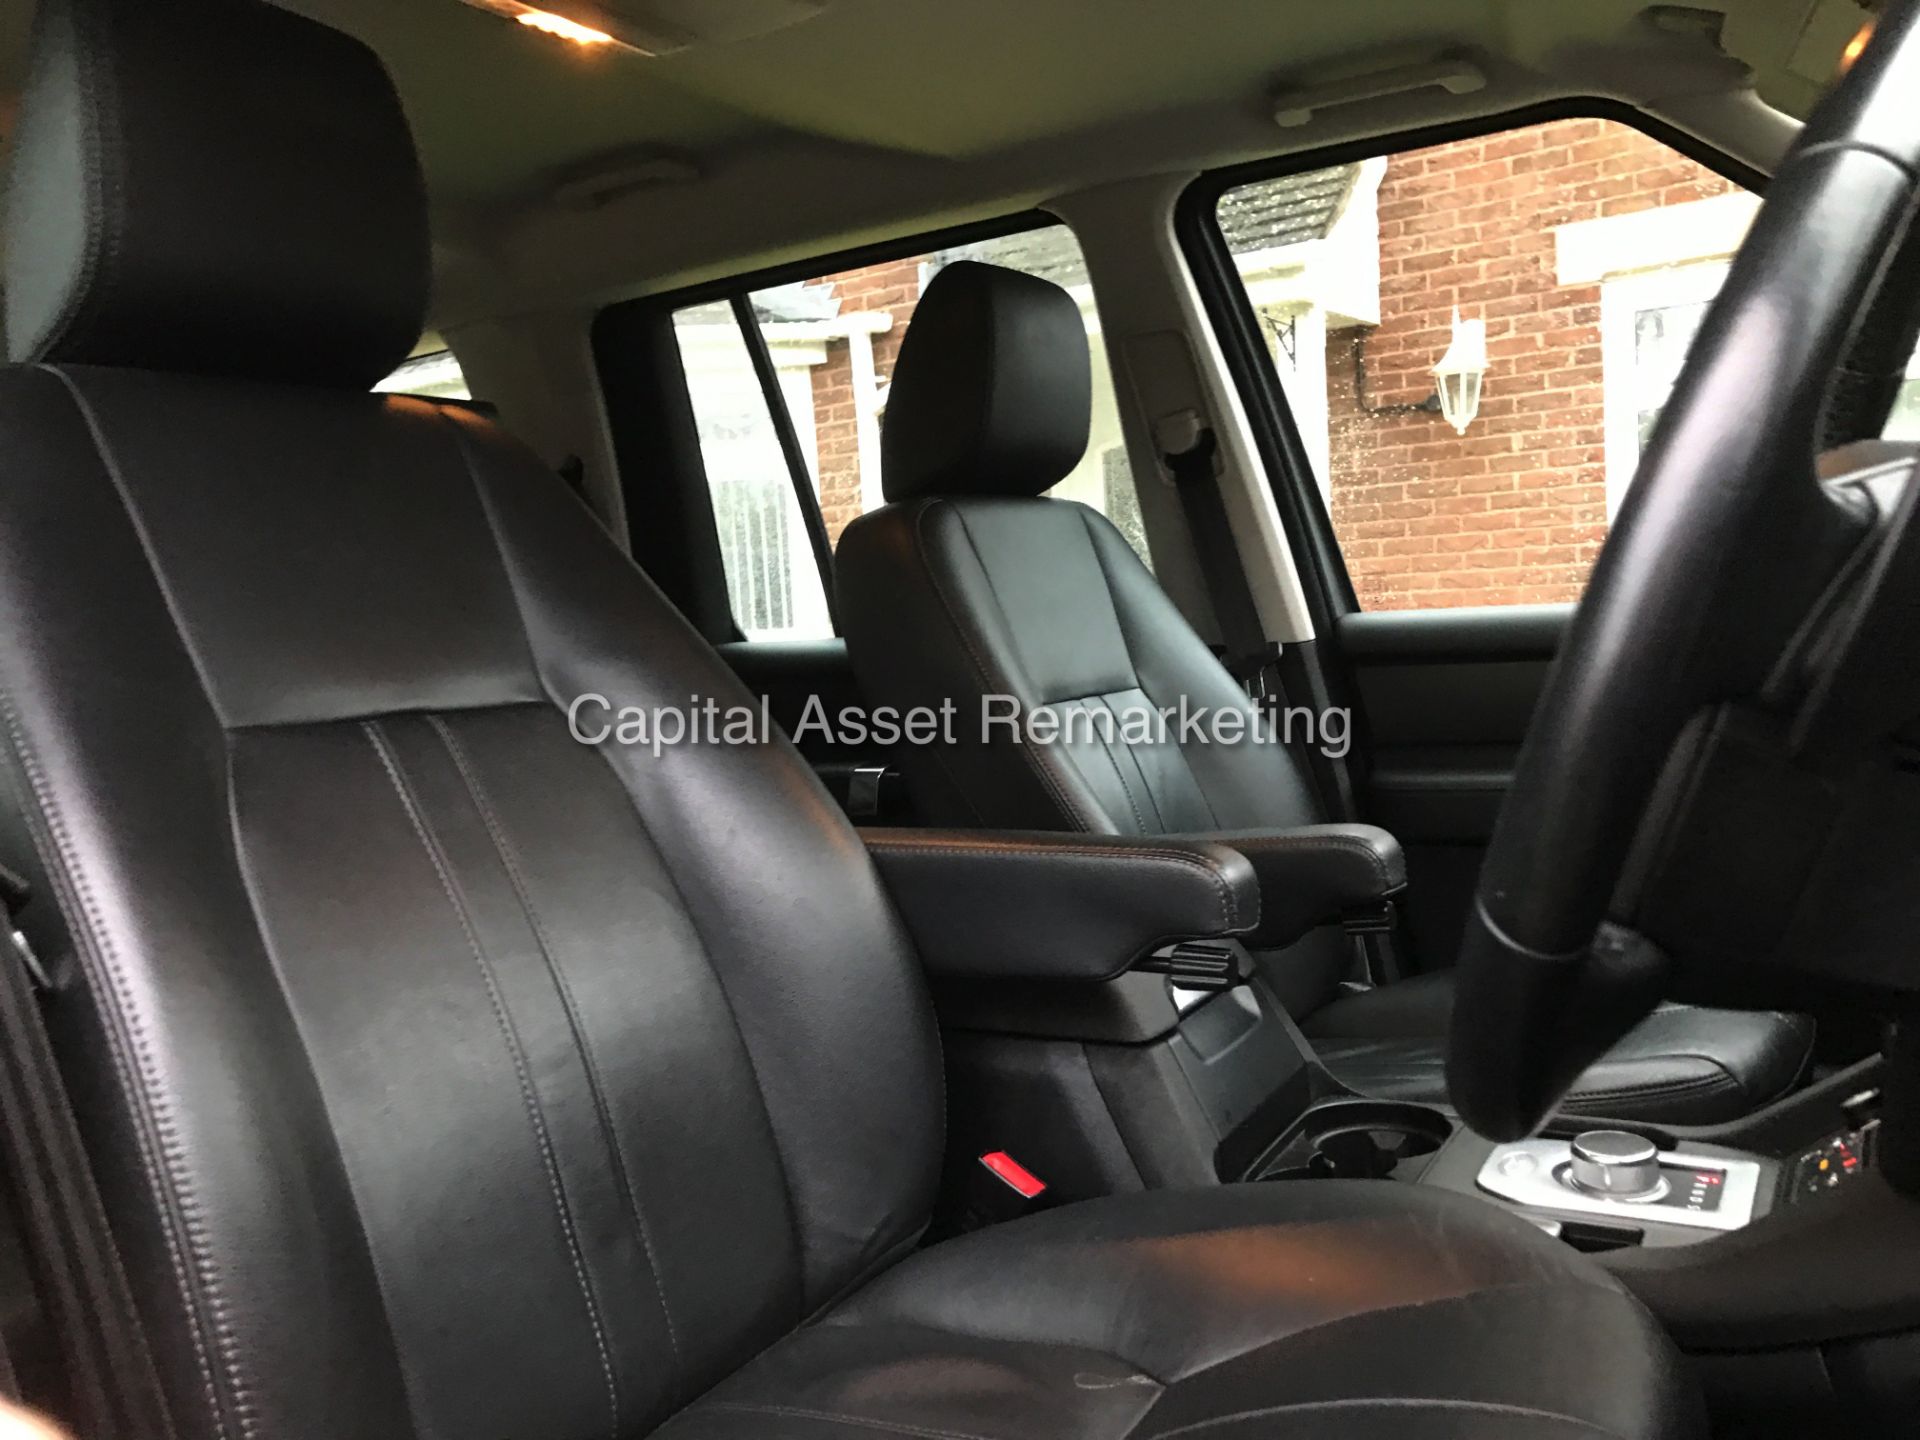 LANDROVER DISCOVERY 3.0 "SDV6 - XS" AUTO (2013 MODEL) 1 OWNER - LOW MILES / FSH - NAV - LEATHER - Bild 10 aus 21